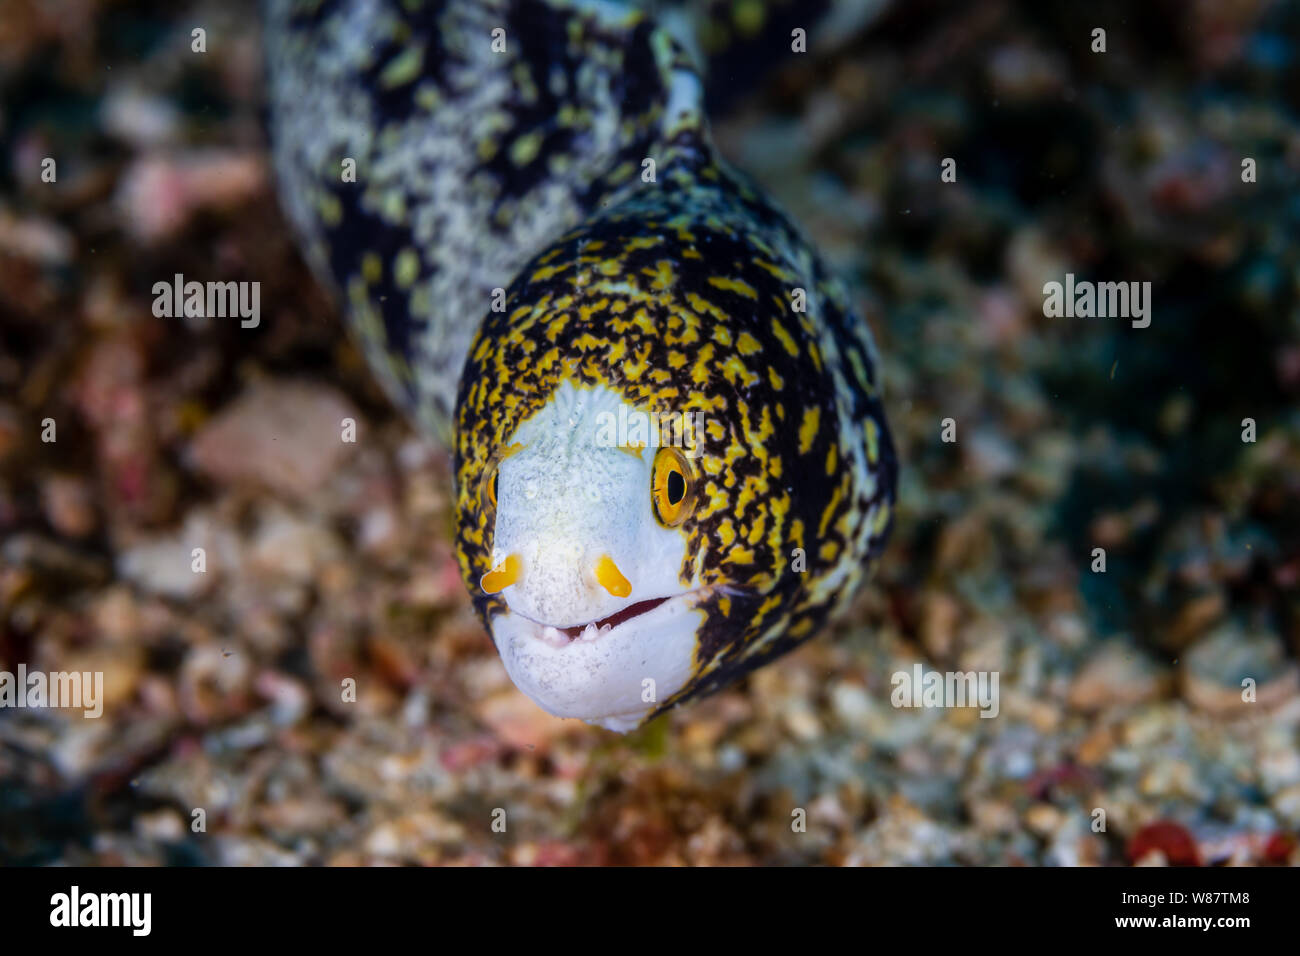 A Curious Snowflake Moray Eel on a Tropical Coral Reef Stock Photo